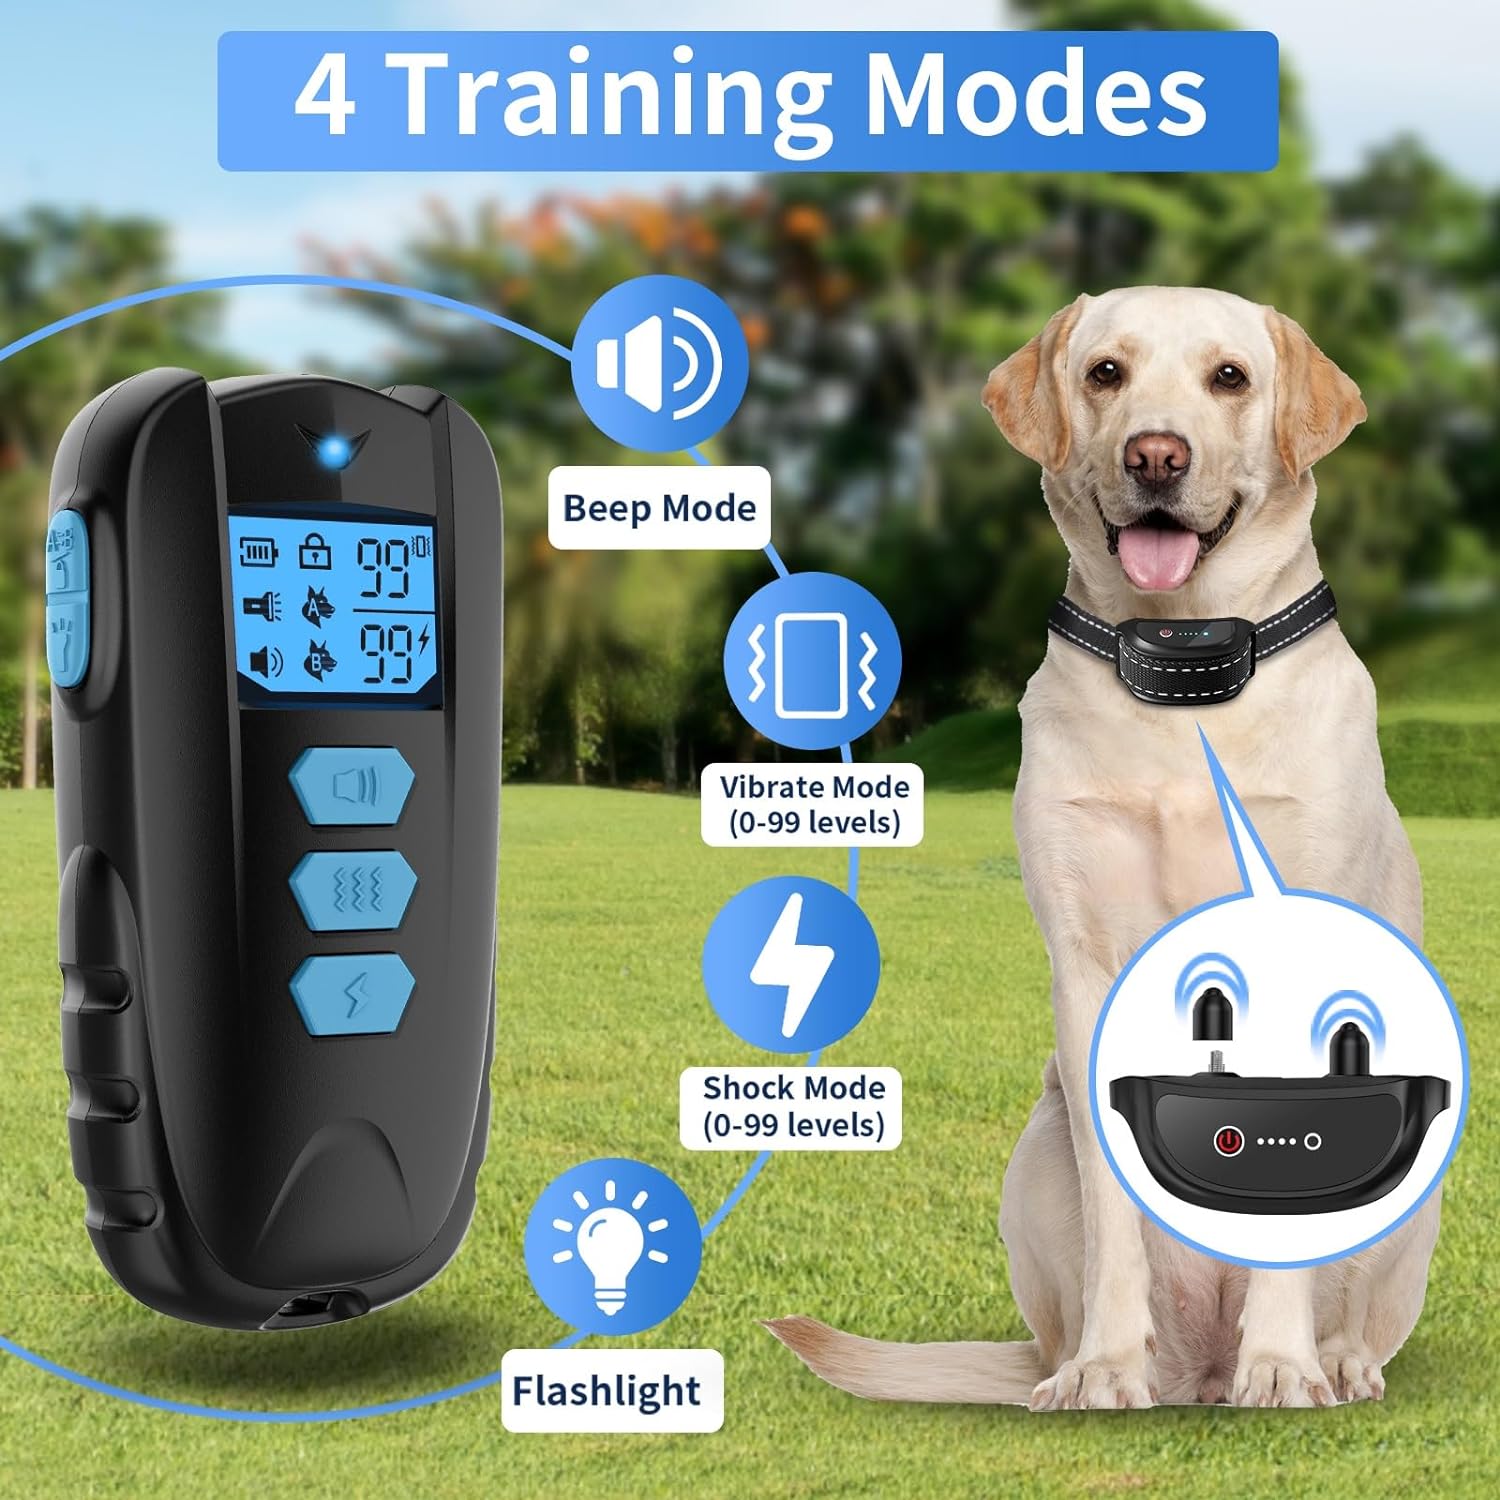 Dog Shock Collar with Remote - Electric Dog Training Collar 1650ft, Rechargeable E-Collar Waterproof Collars with 4 Training Modes and Security Lock for Small Medium Large Dogs (8-150 LBS)